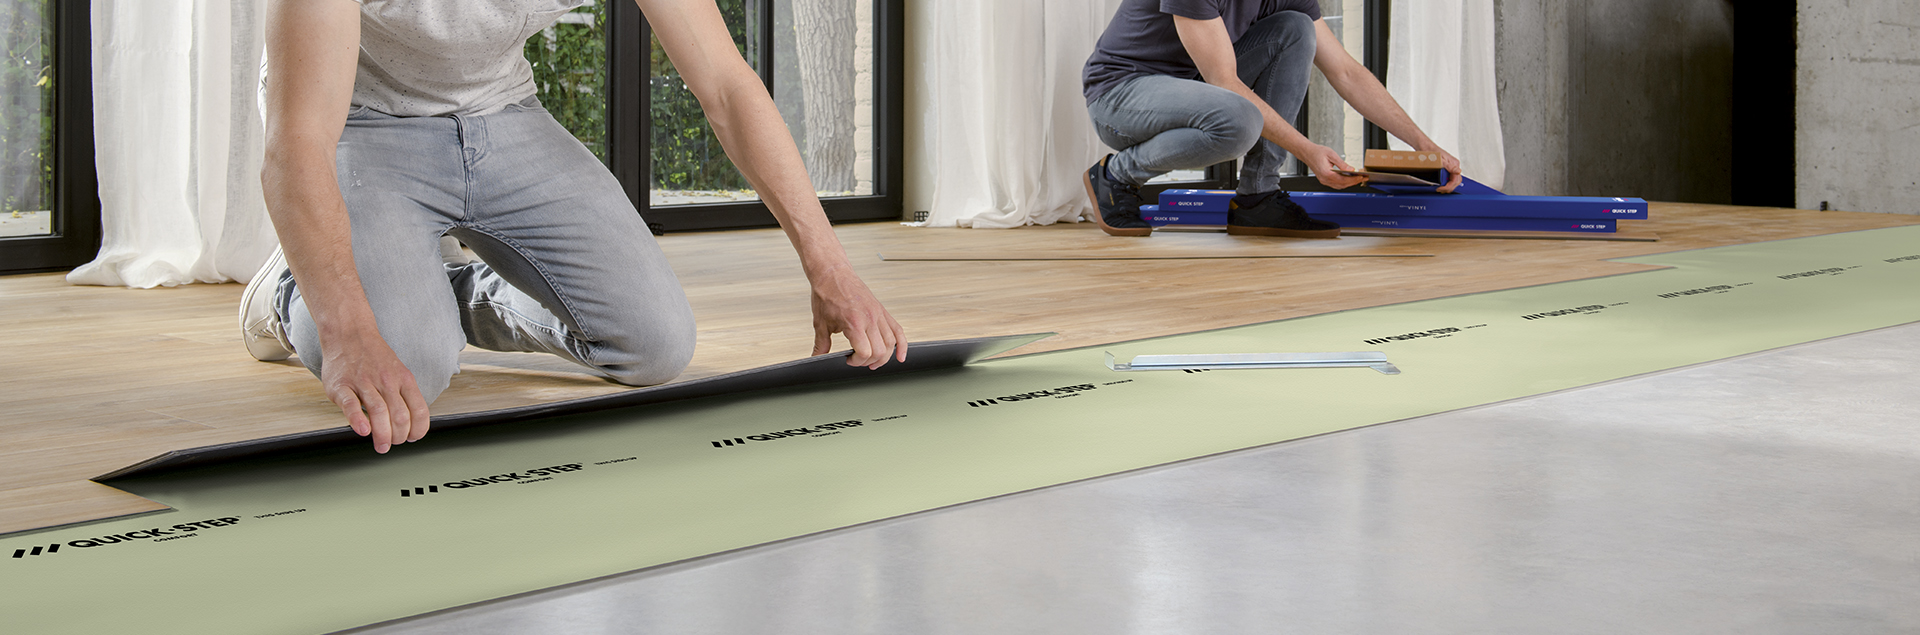 Quick Tips Vinyl Plank Flooring Tools Needed How to Use Them 